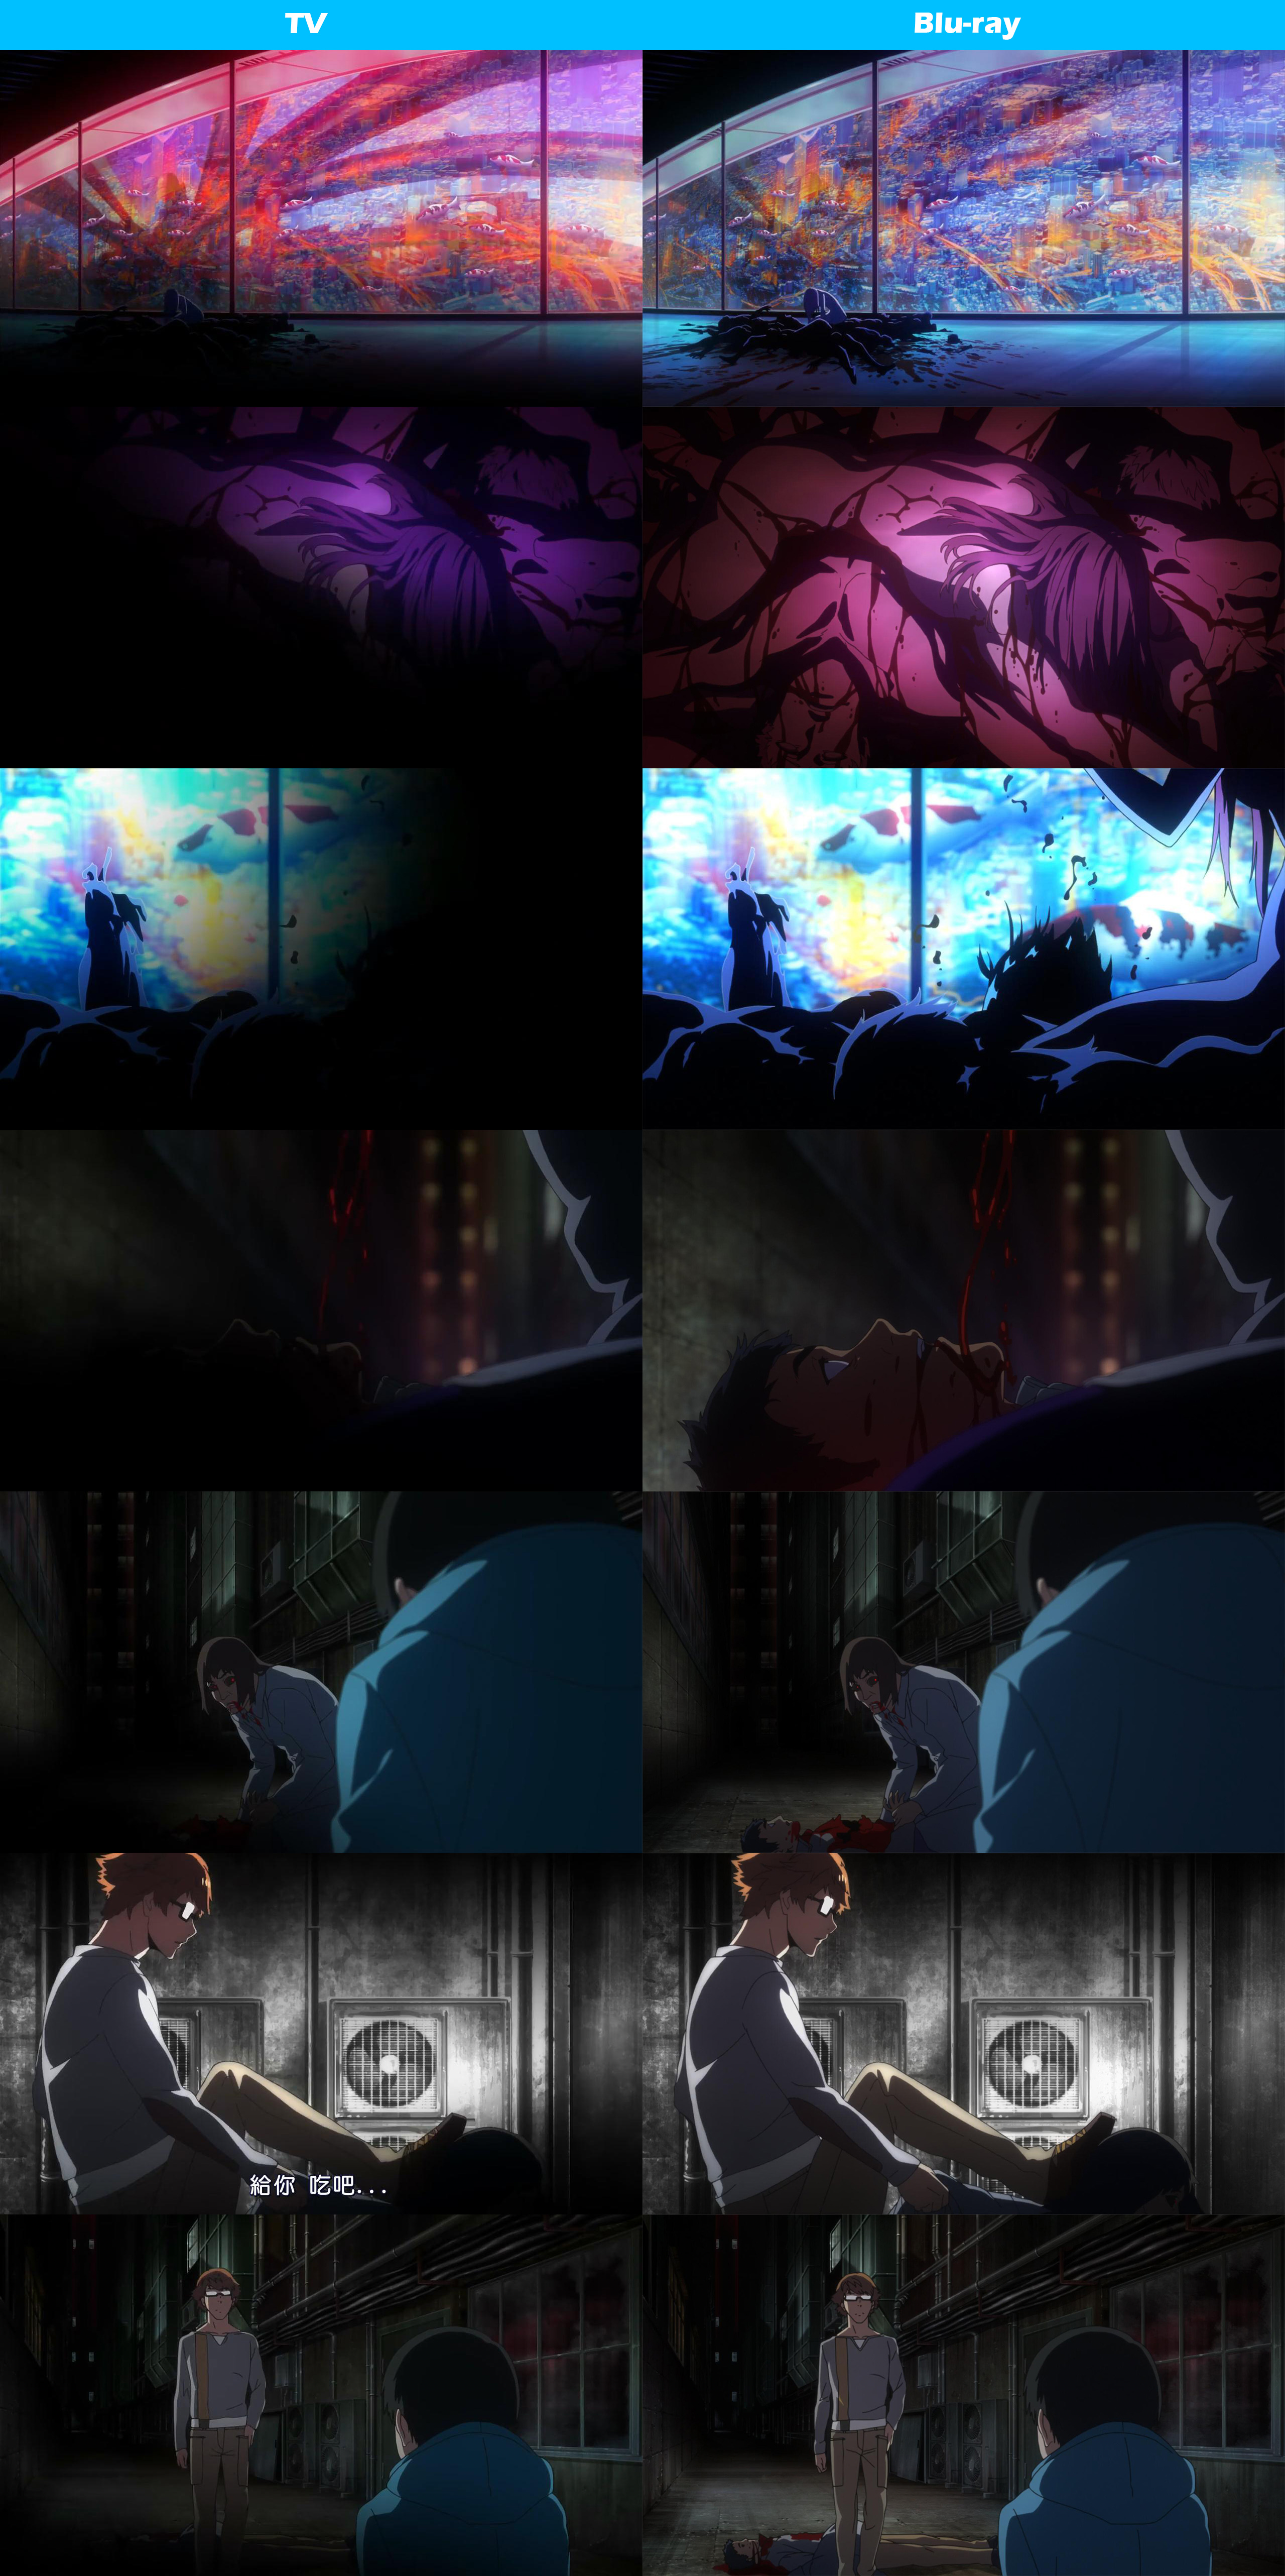 Tokyo-Ghoul---TV-and-Blu-ray-Comparison-Image-1